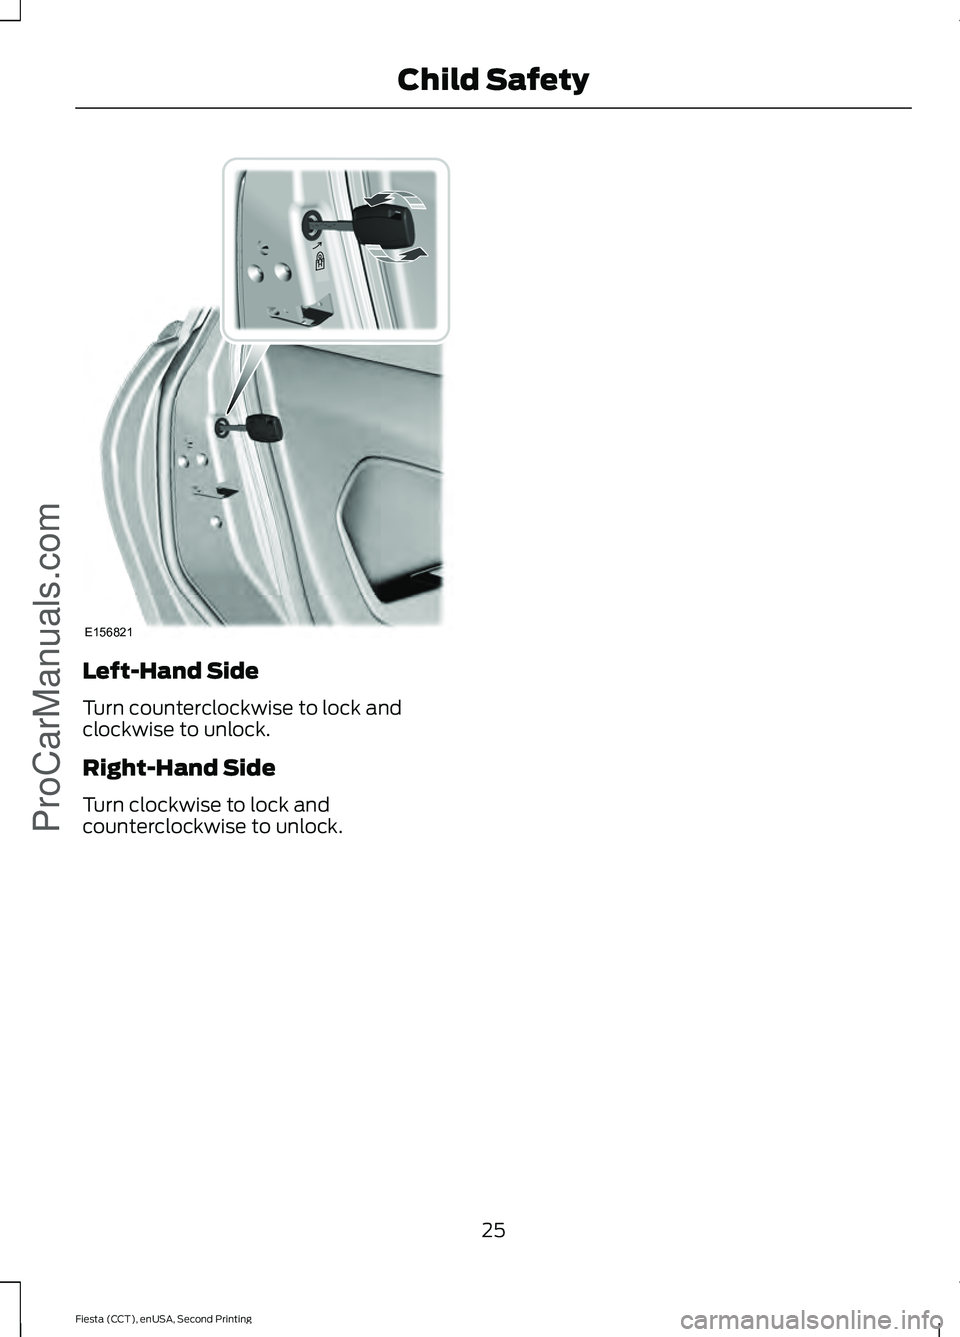 FORD FIESTA 2015  Owners Manual Left-Hand Side
Turn counterclockwise to lock and
clockwise to unlock.
Right-Hand Side
Turn clockwise to lock and
counterclockwise to unlock.
25
Fiesta (CCT), enUSA, Second Printing Child SafetyProCarM